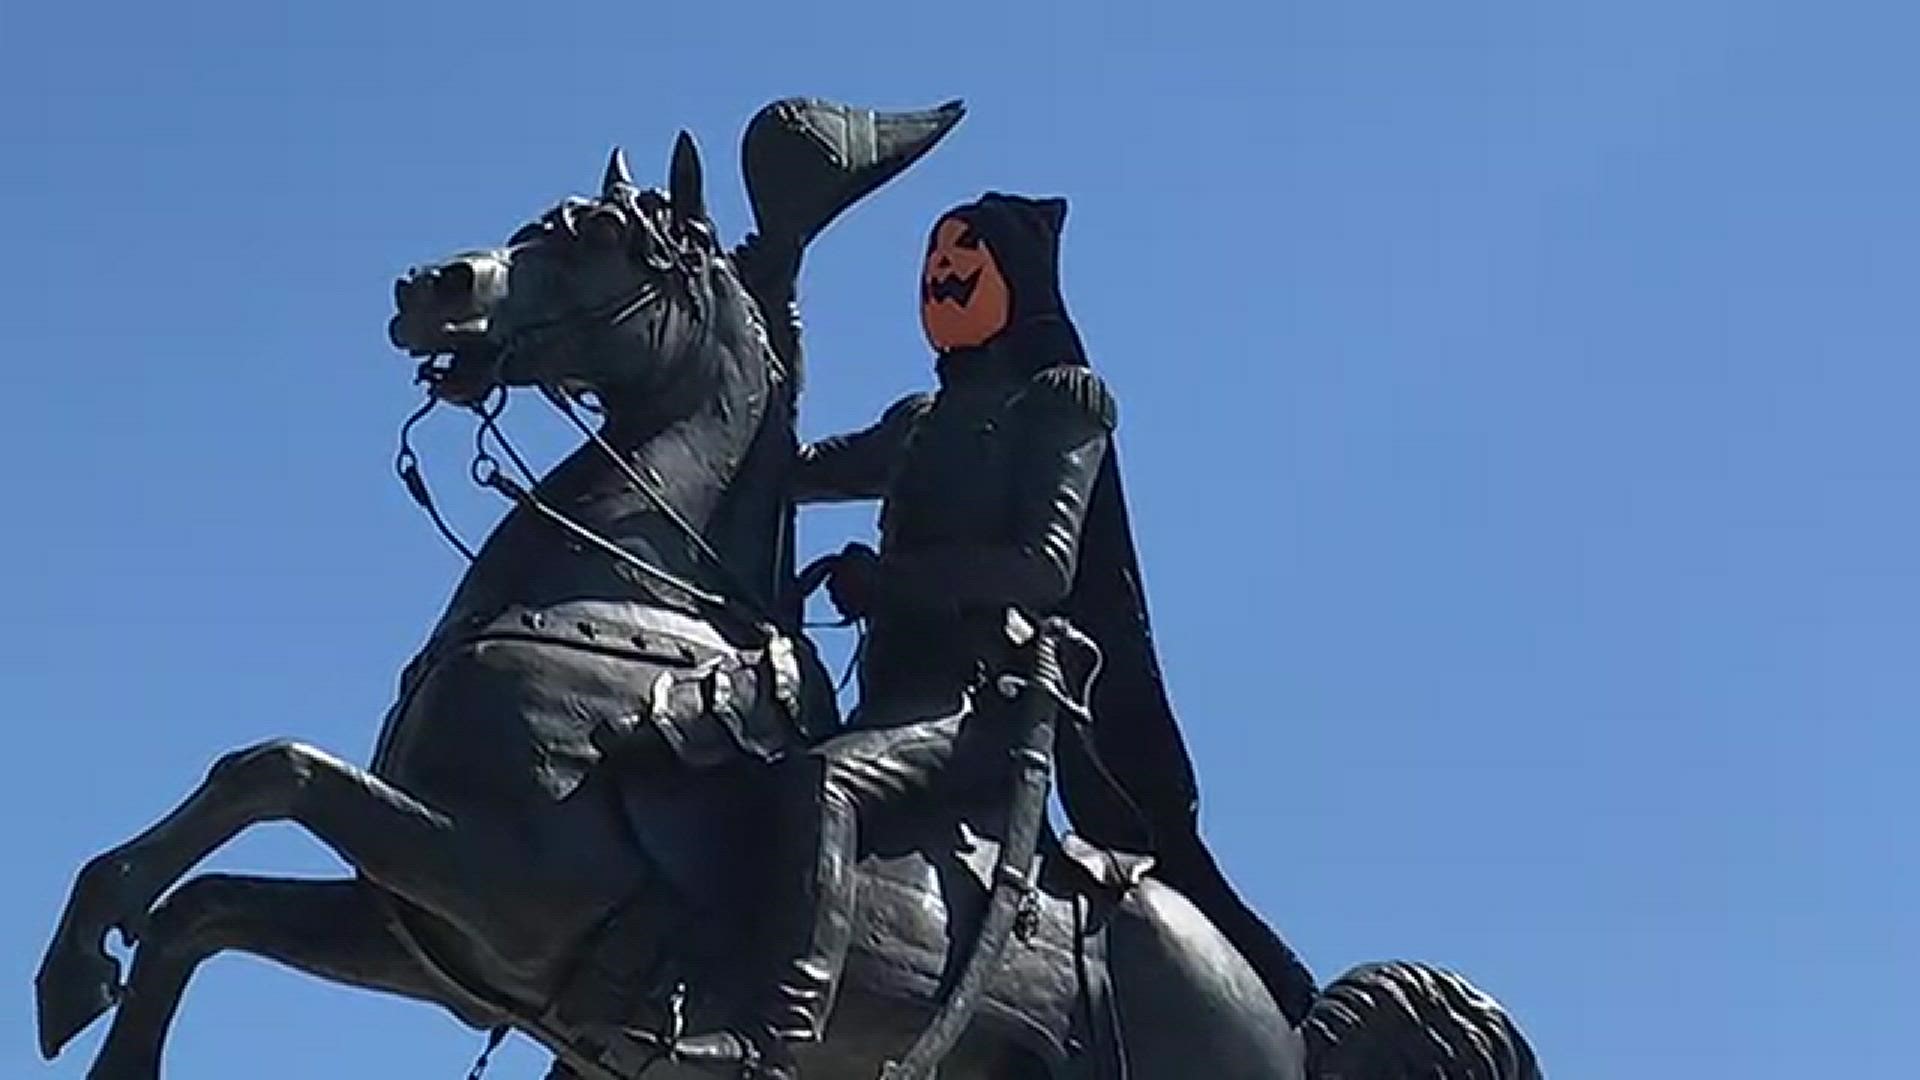 The tribute to Andrew Jackson is now wearing a pumpkin head mask and cape, as seen today on Water Street in Downtown Jacksonville.